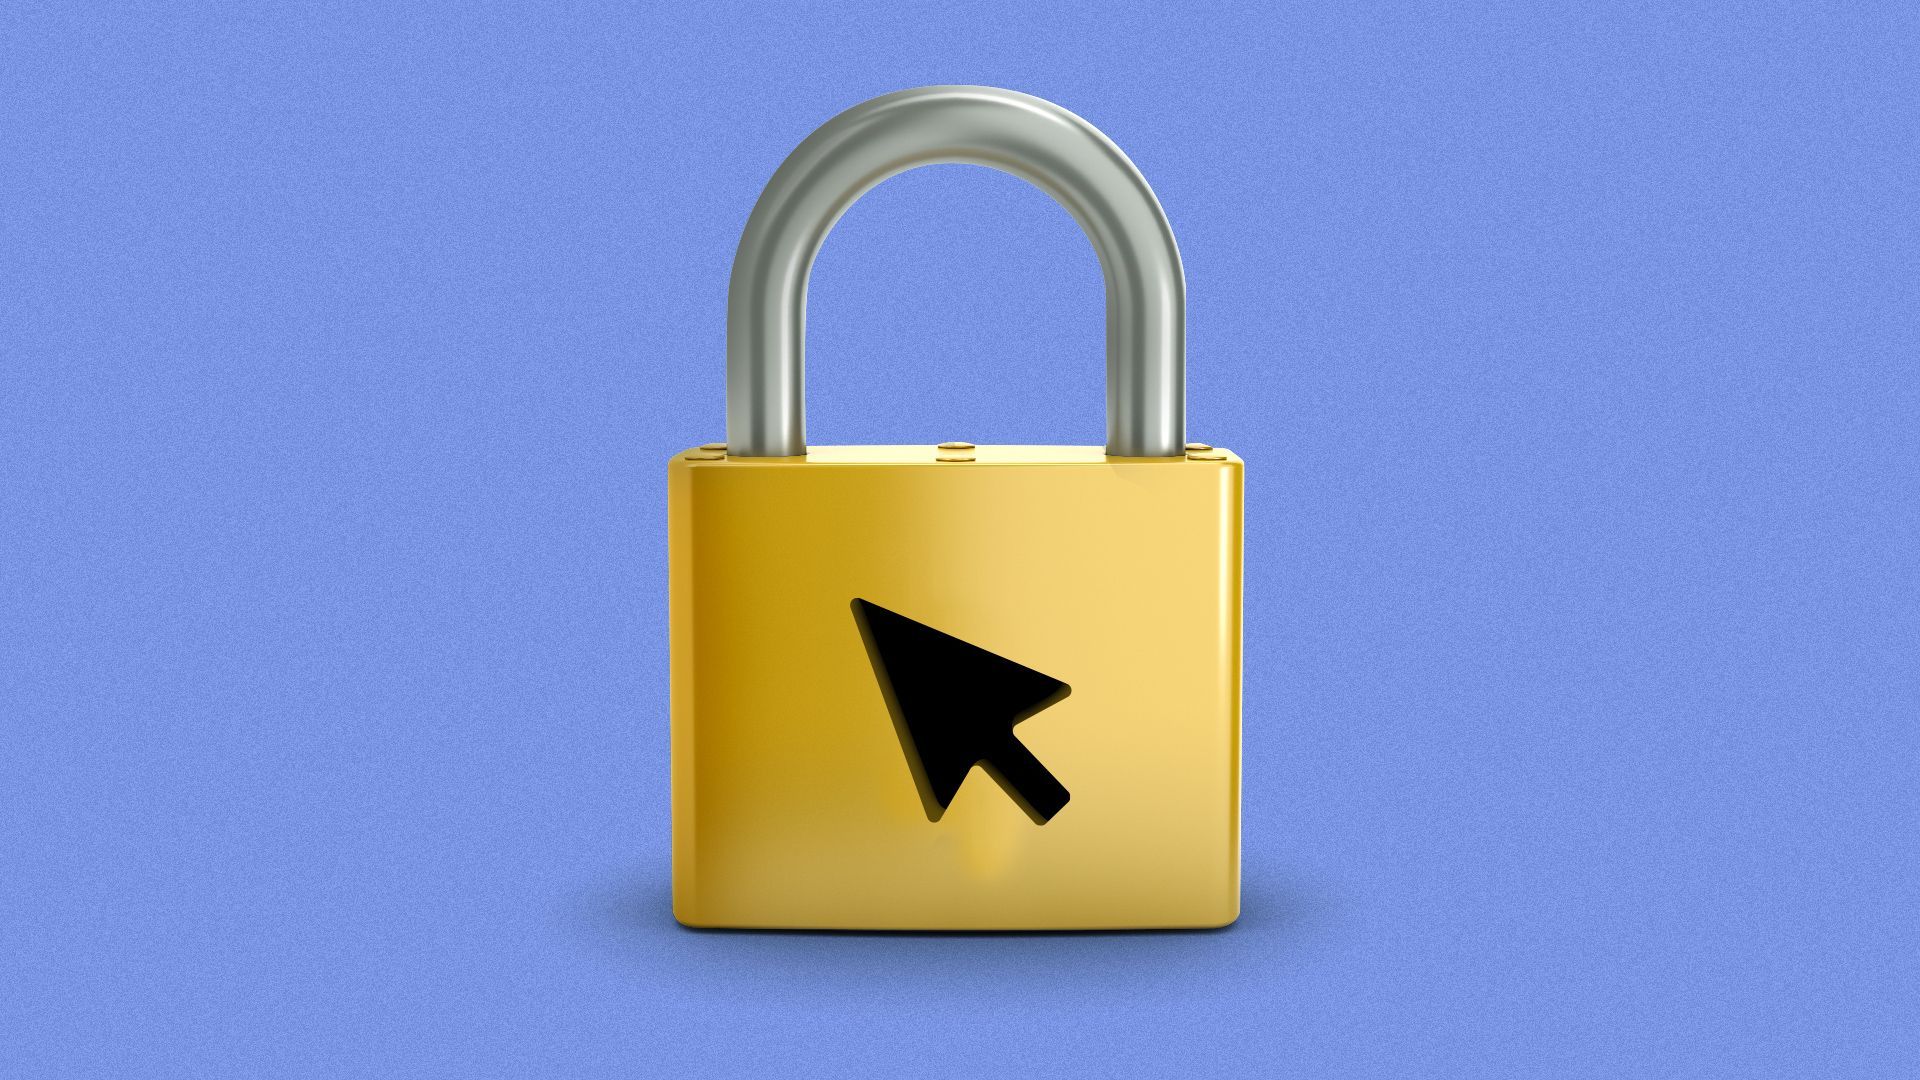 Illustration of a padlock with a cursor shape as the keyhole. 